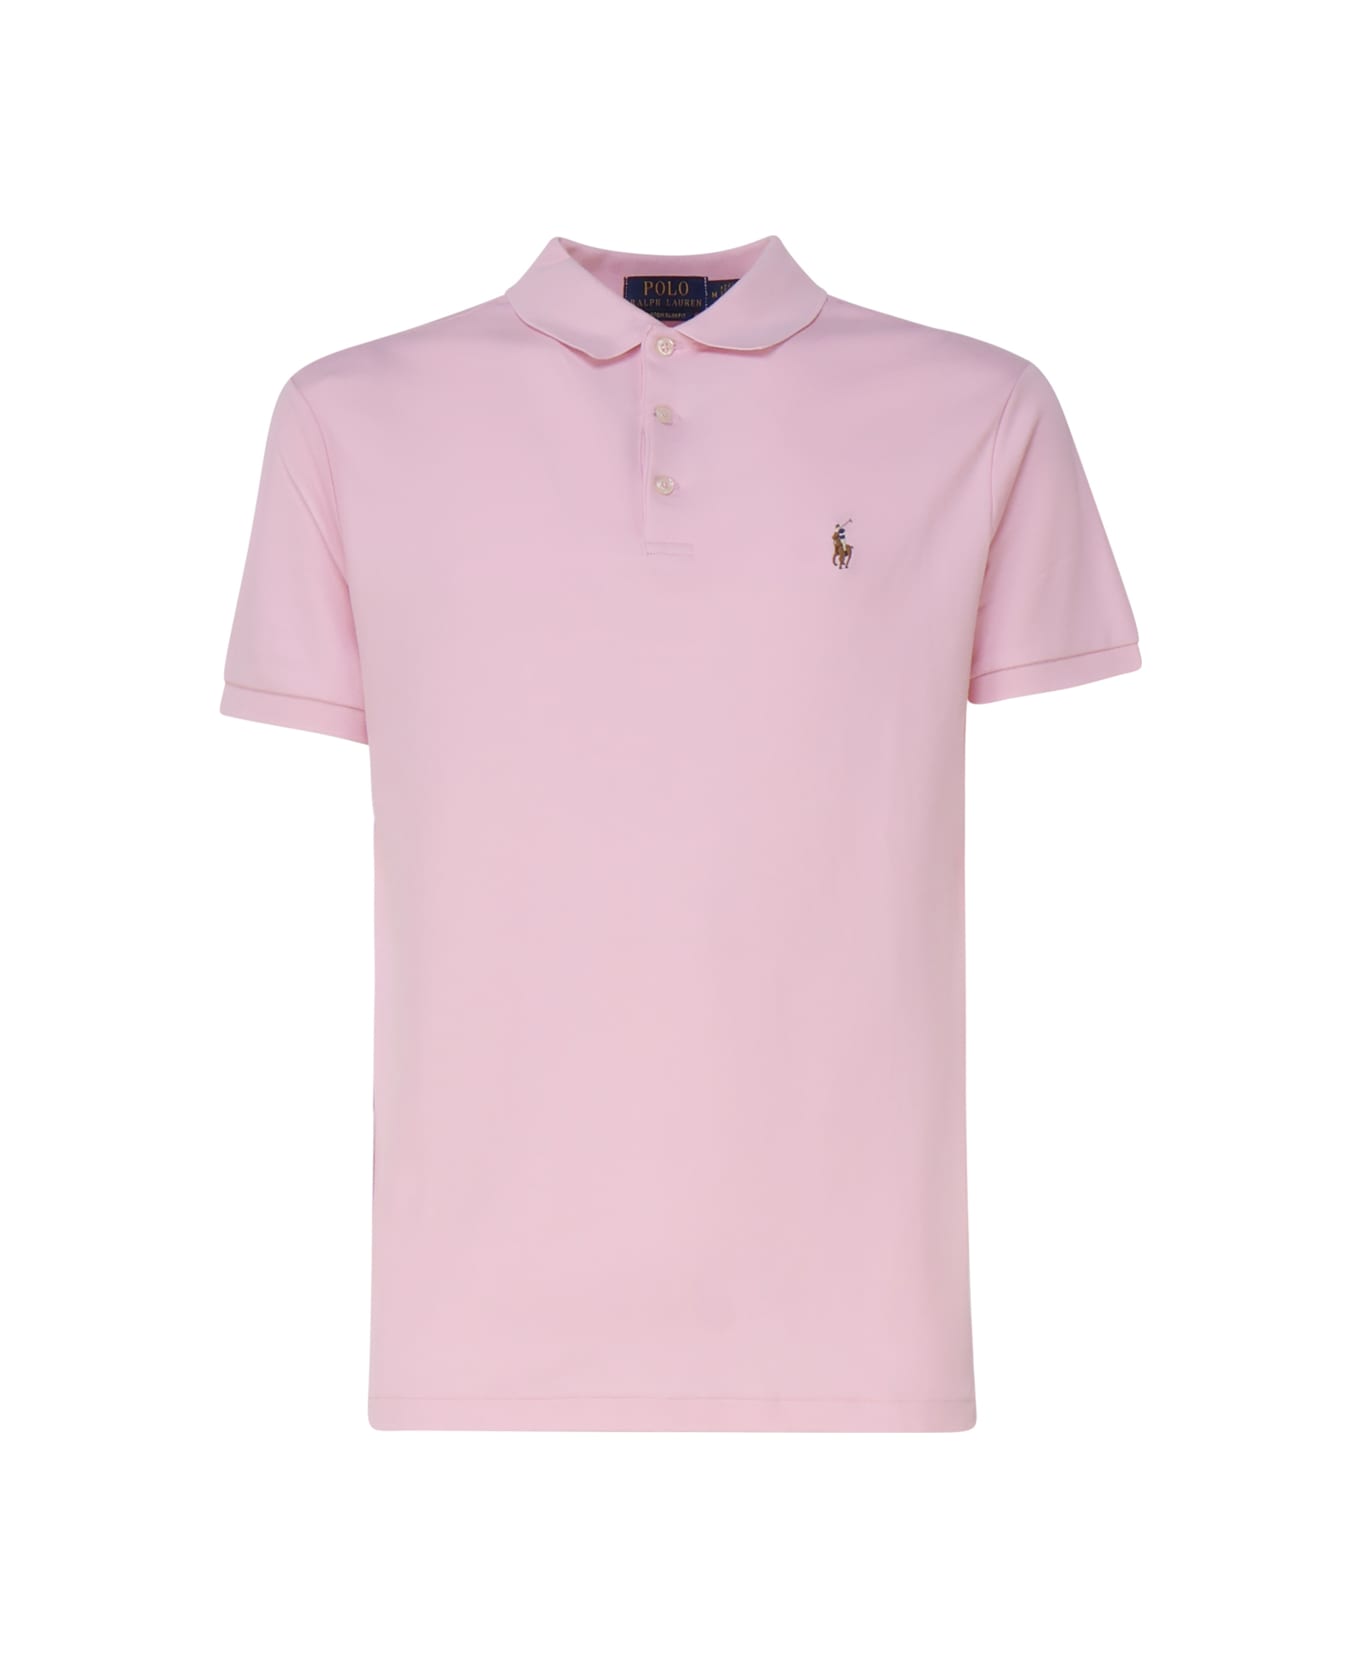 Polo Ralph Lauren Polo Shirt With Embroidery - Pink